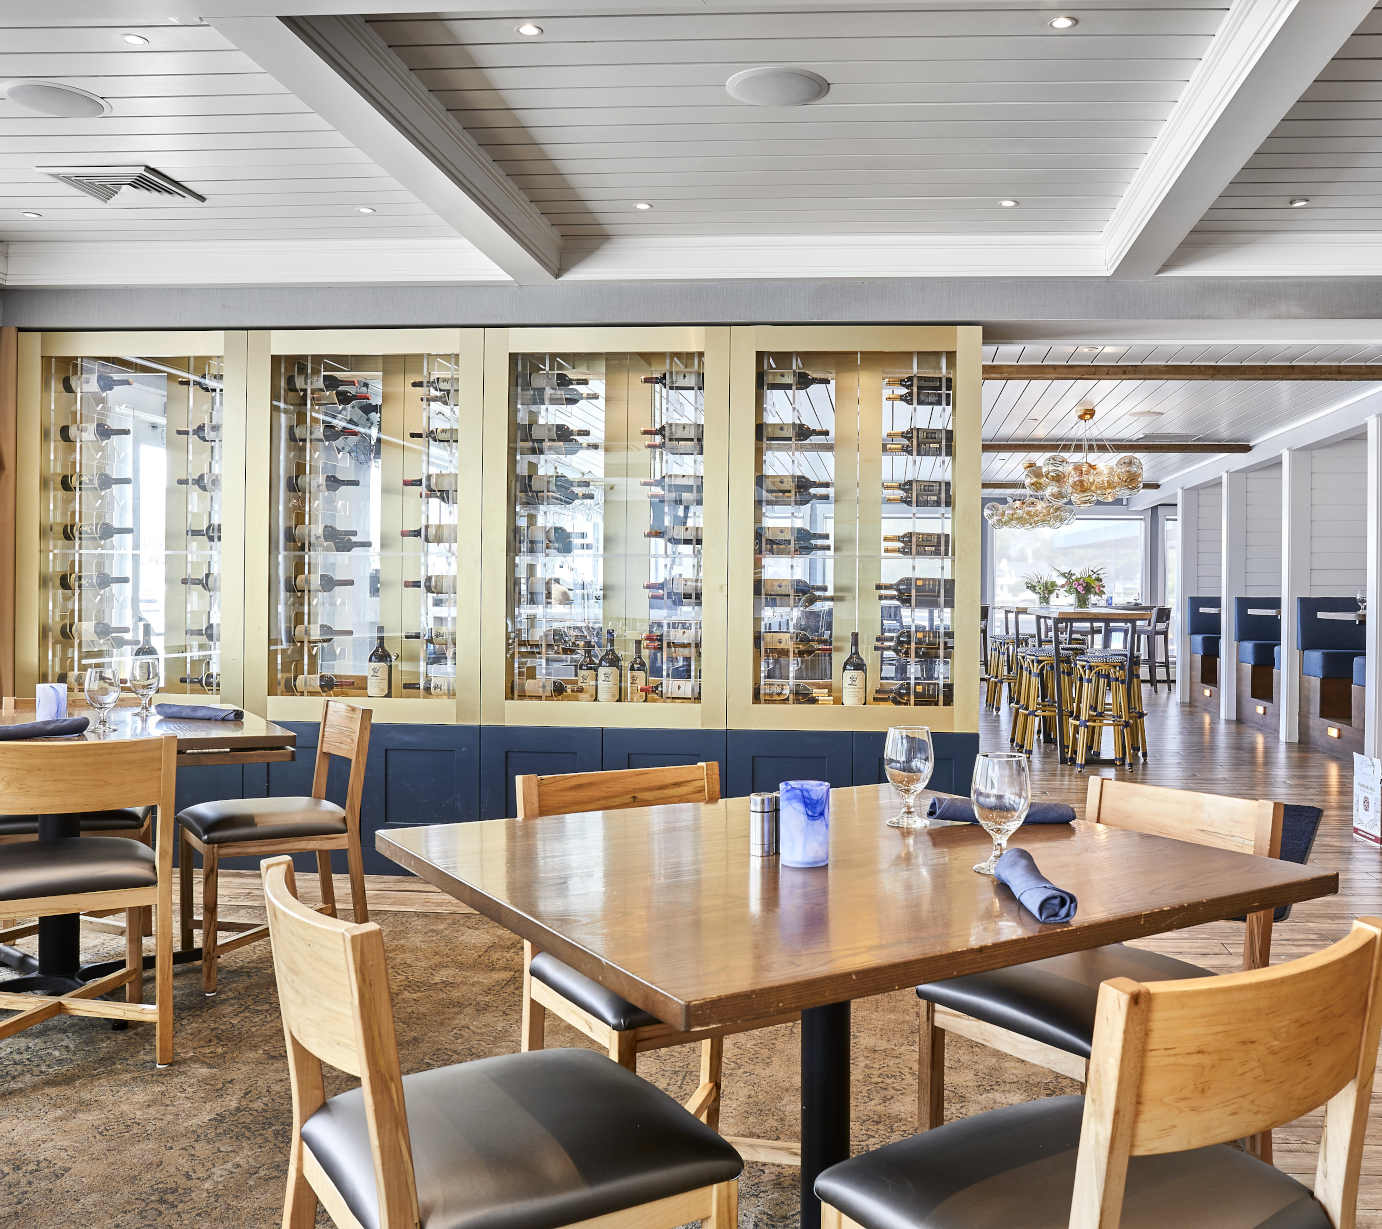 Interior, wine racks, tables and seating